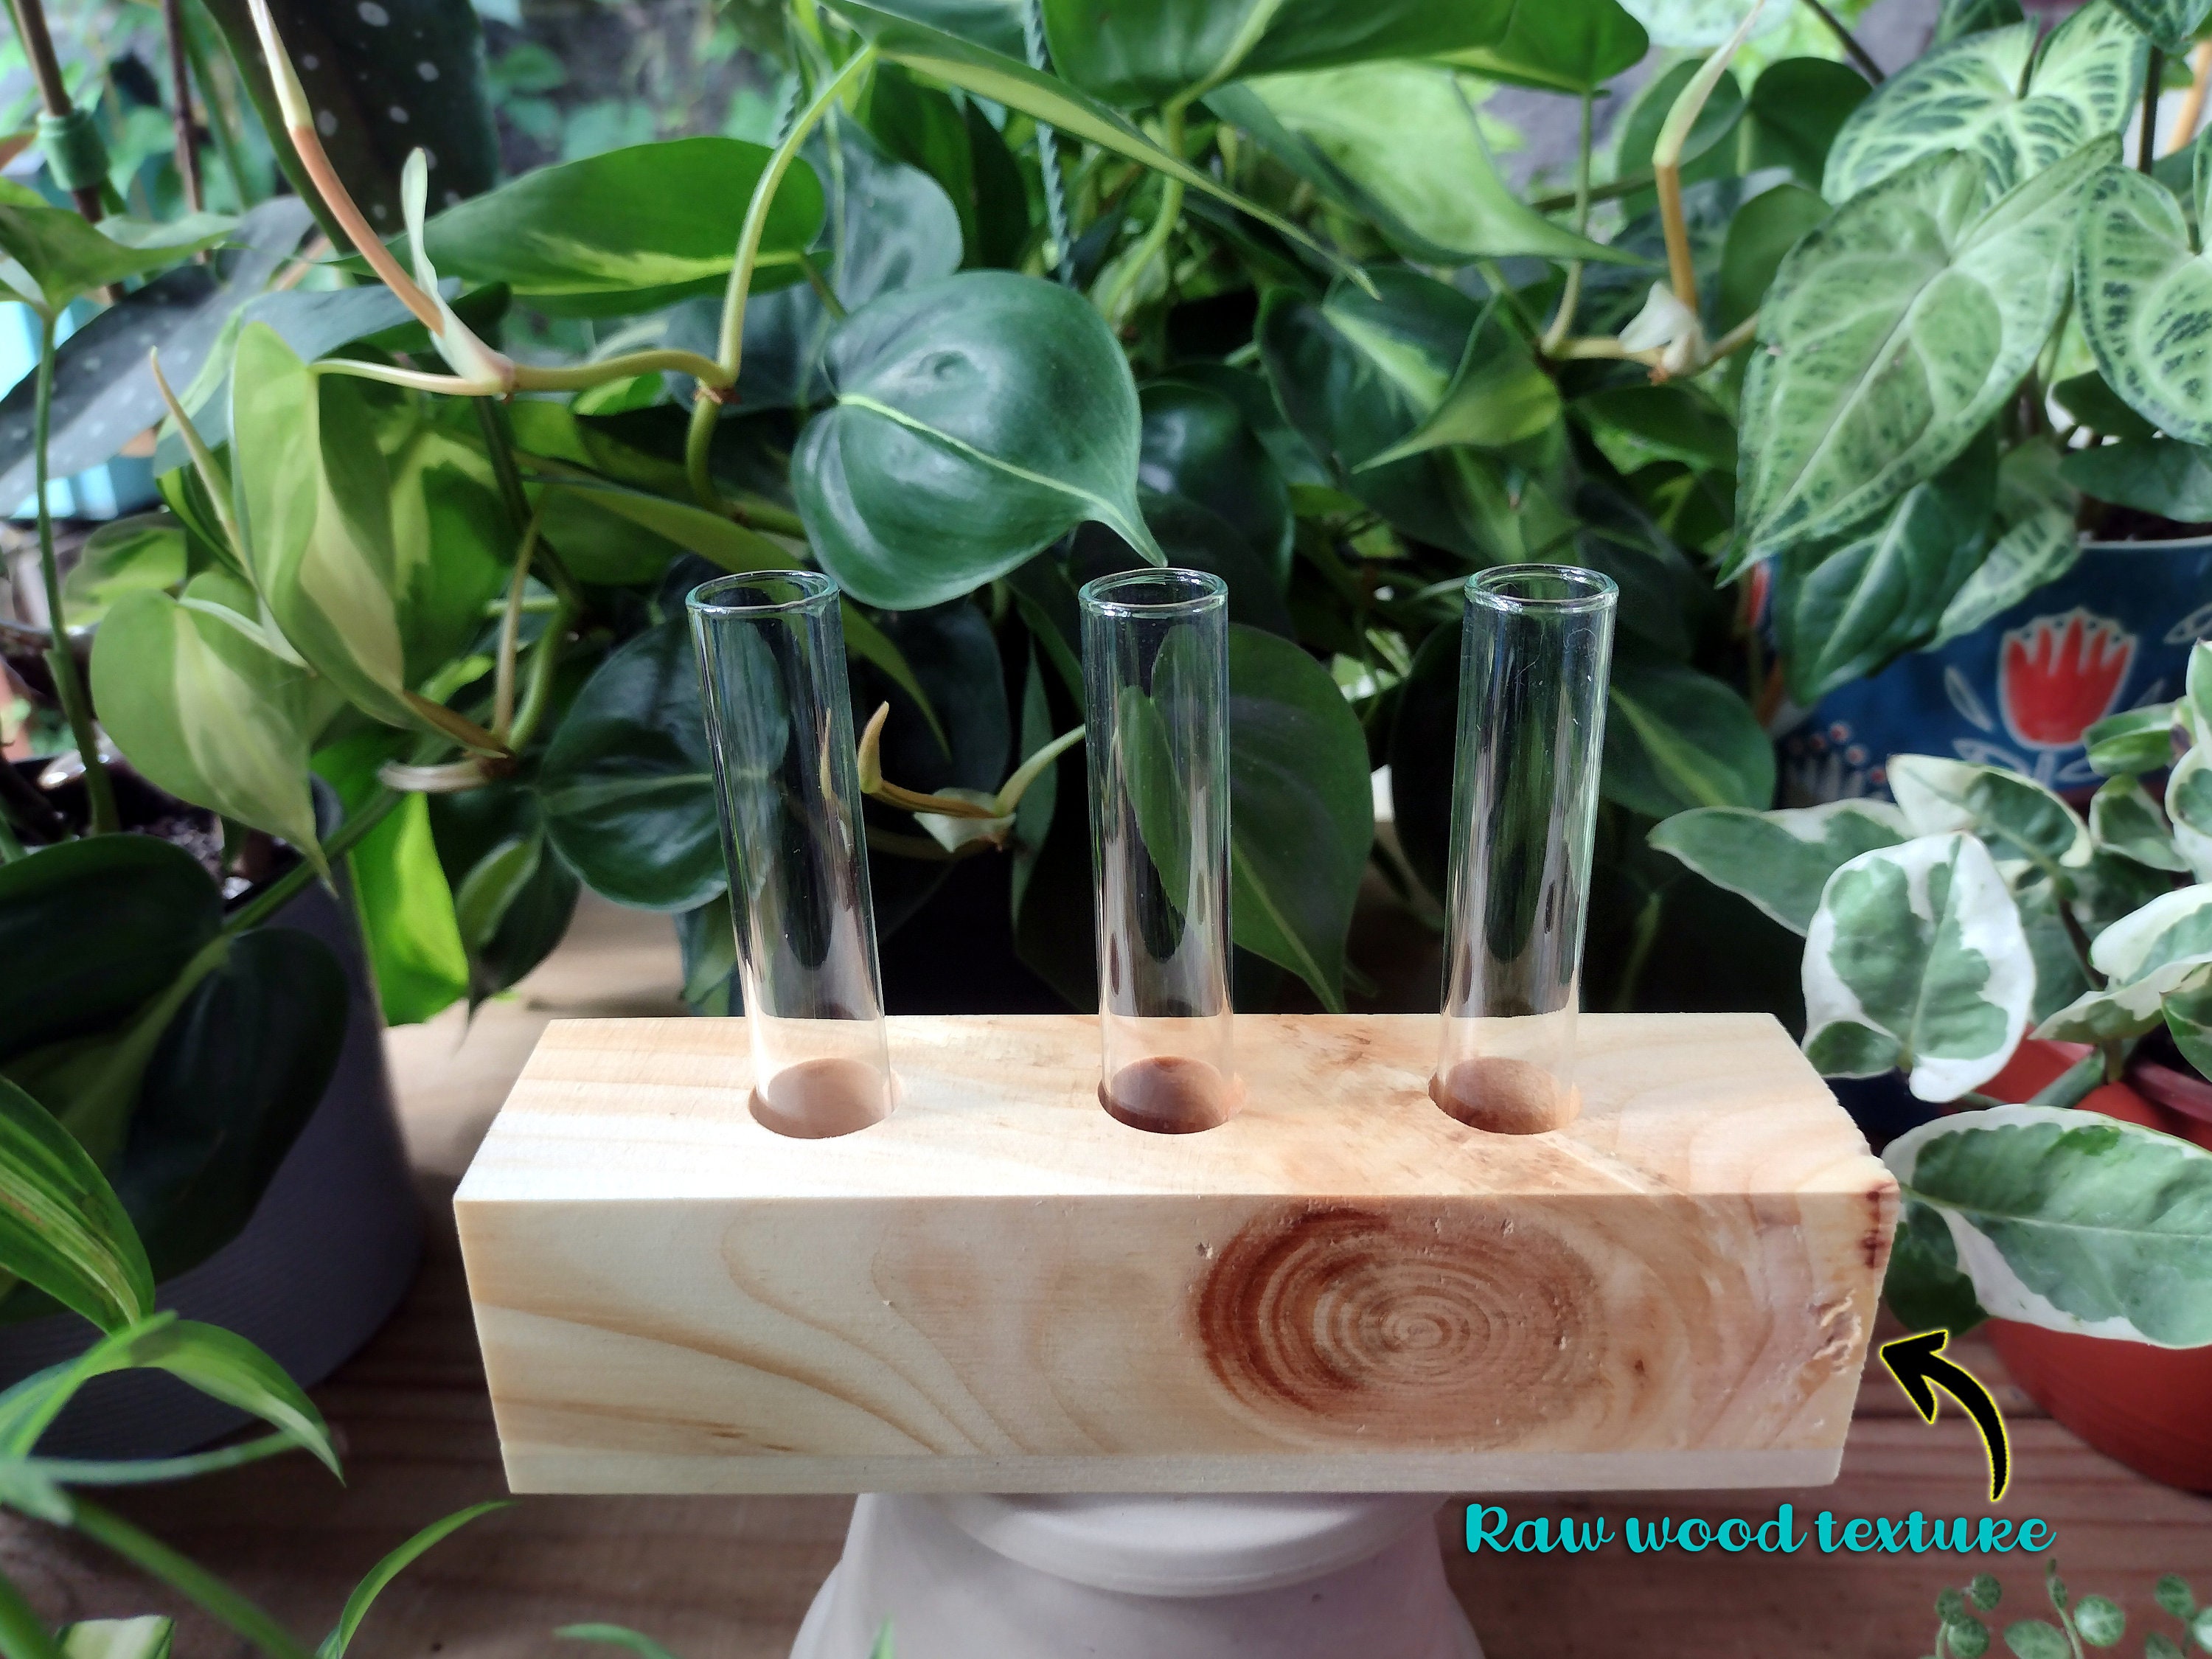  Plant Propagation Station with Cute Wooden Stand – Plant Jars  with Plant Propagation Tubes - Premium Handcrafted Glass Planter –  Propagation Vase for Plant Lovers - Made in USA (3x3 